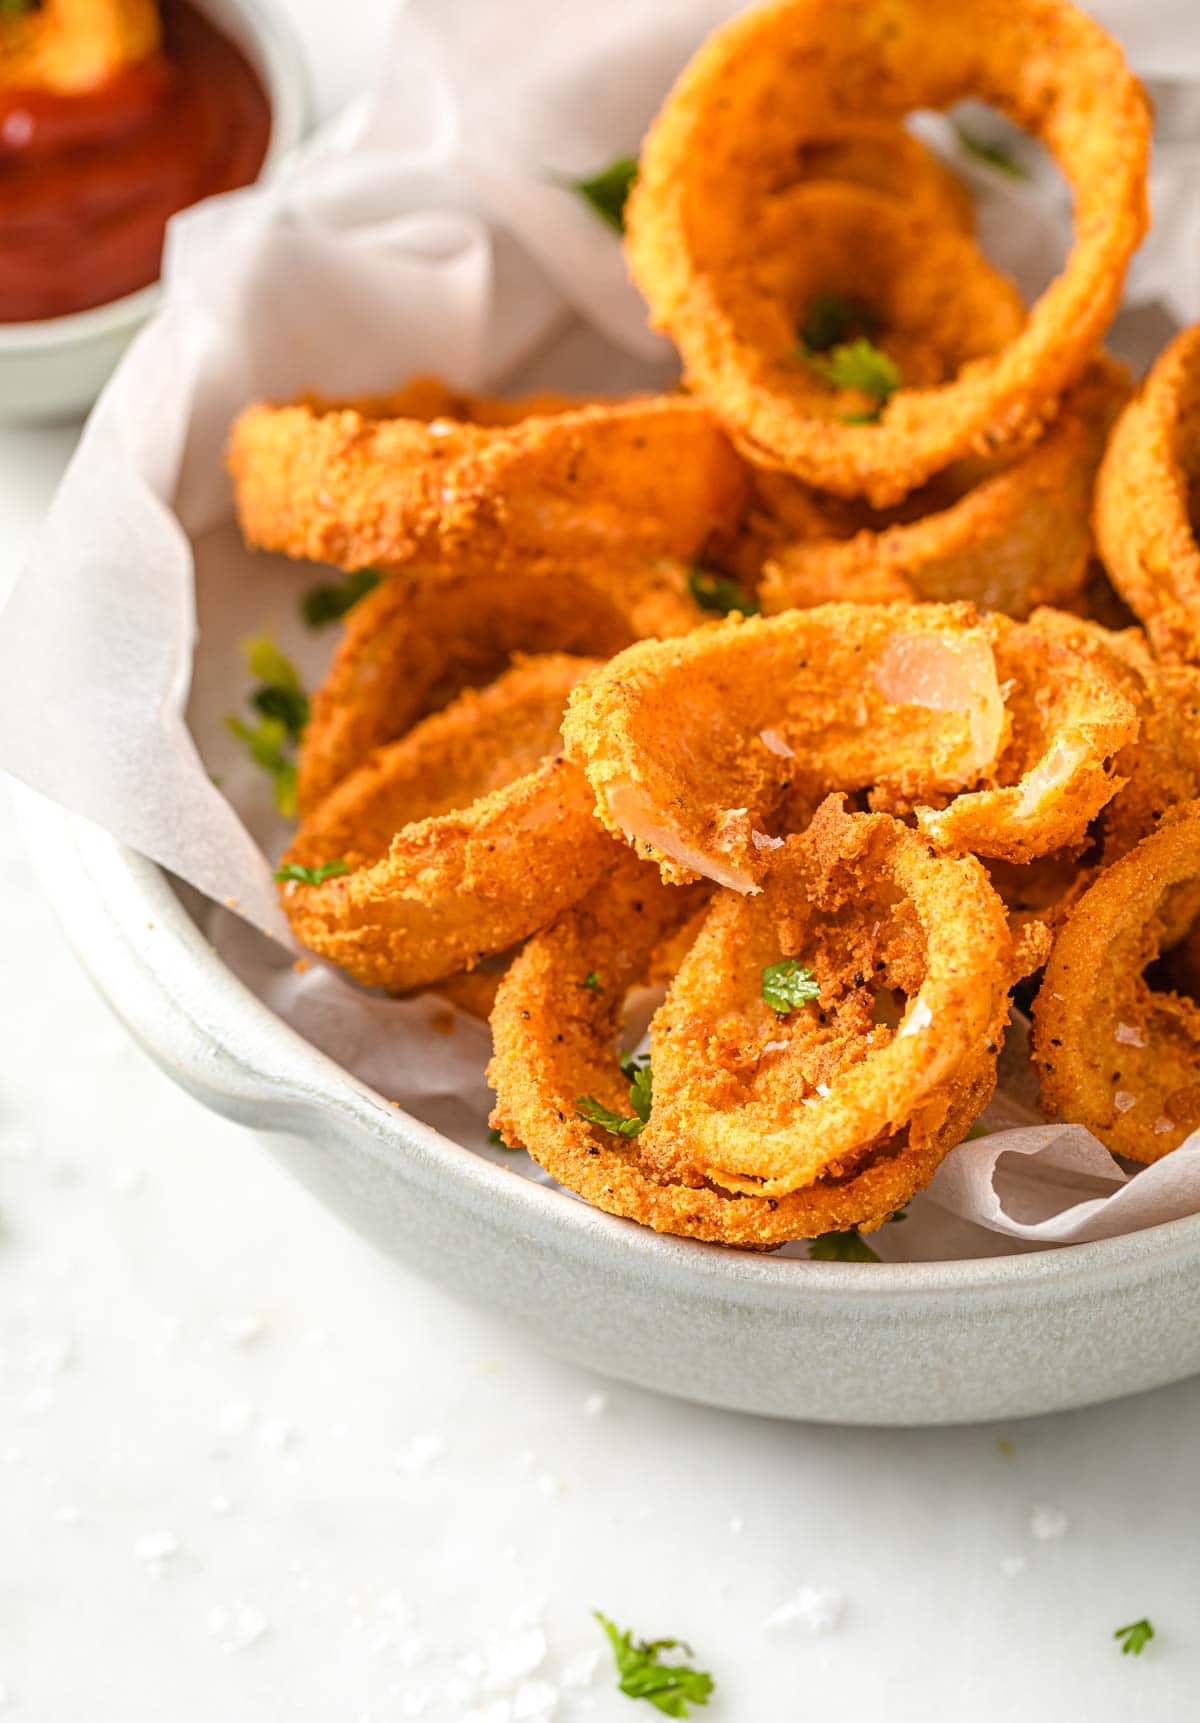 Onion rings in a bowl